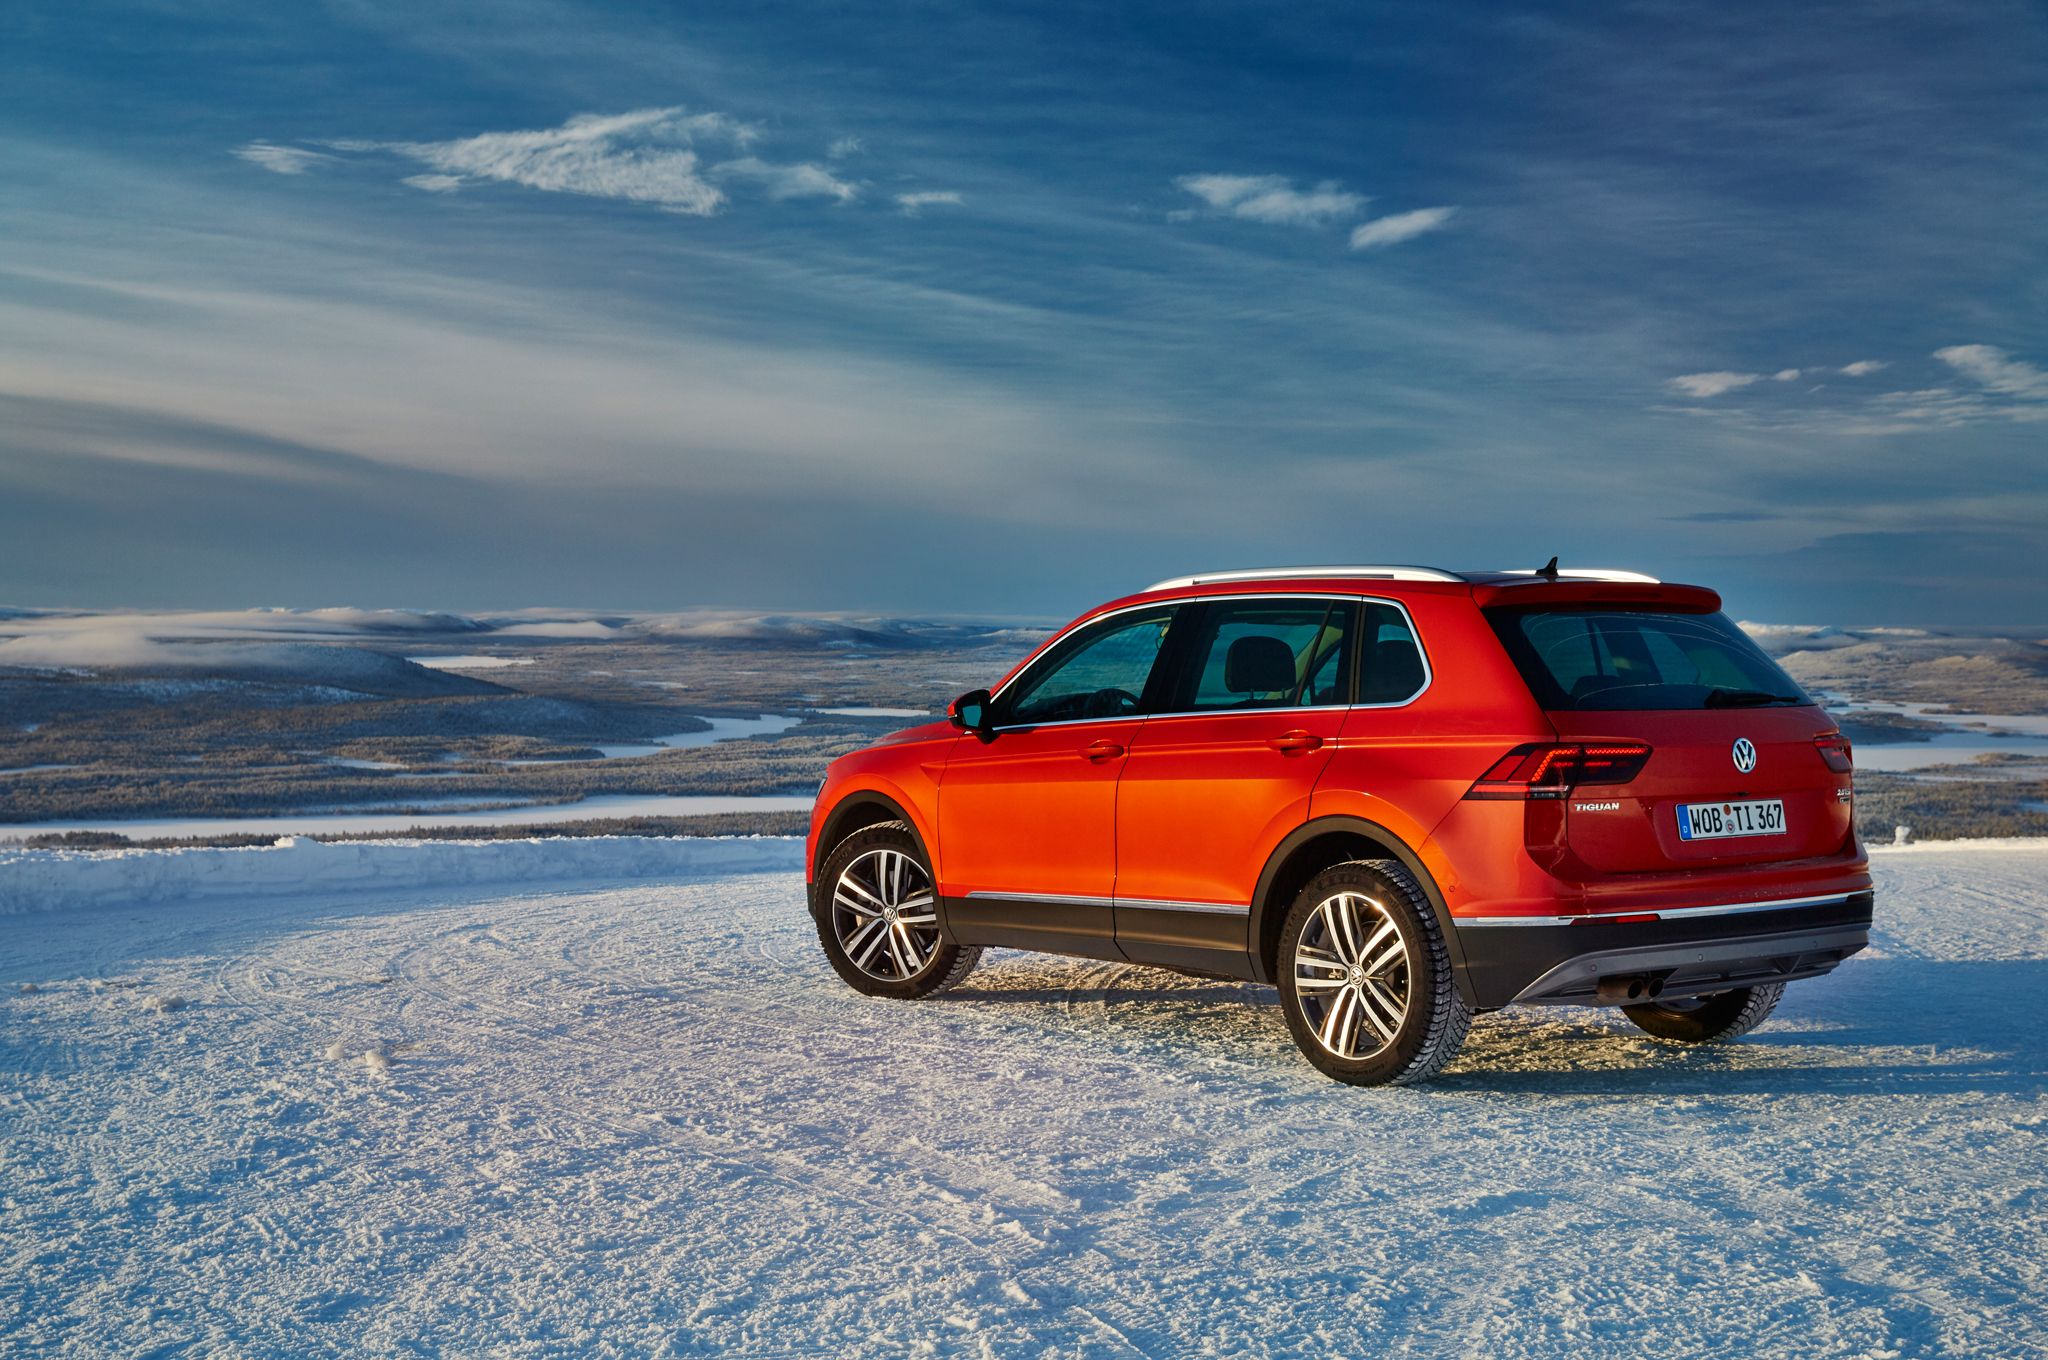 2017 Volkswagen Tiguan Exterior Side And Rear (View 23 of 27)